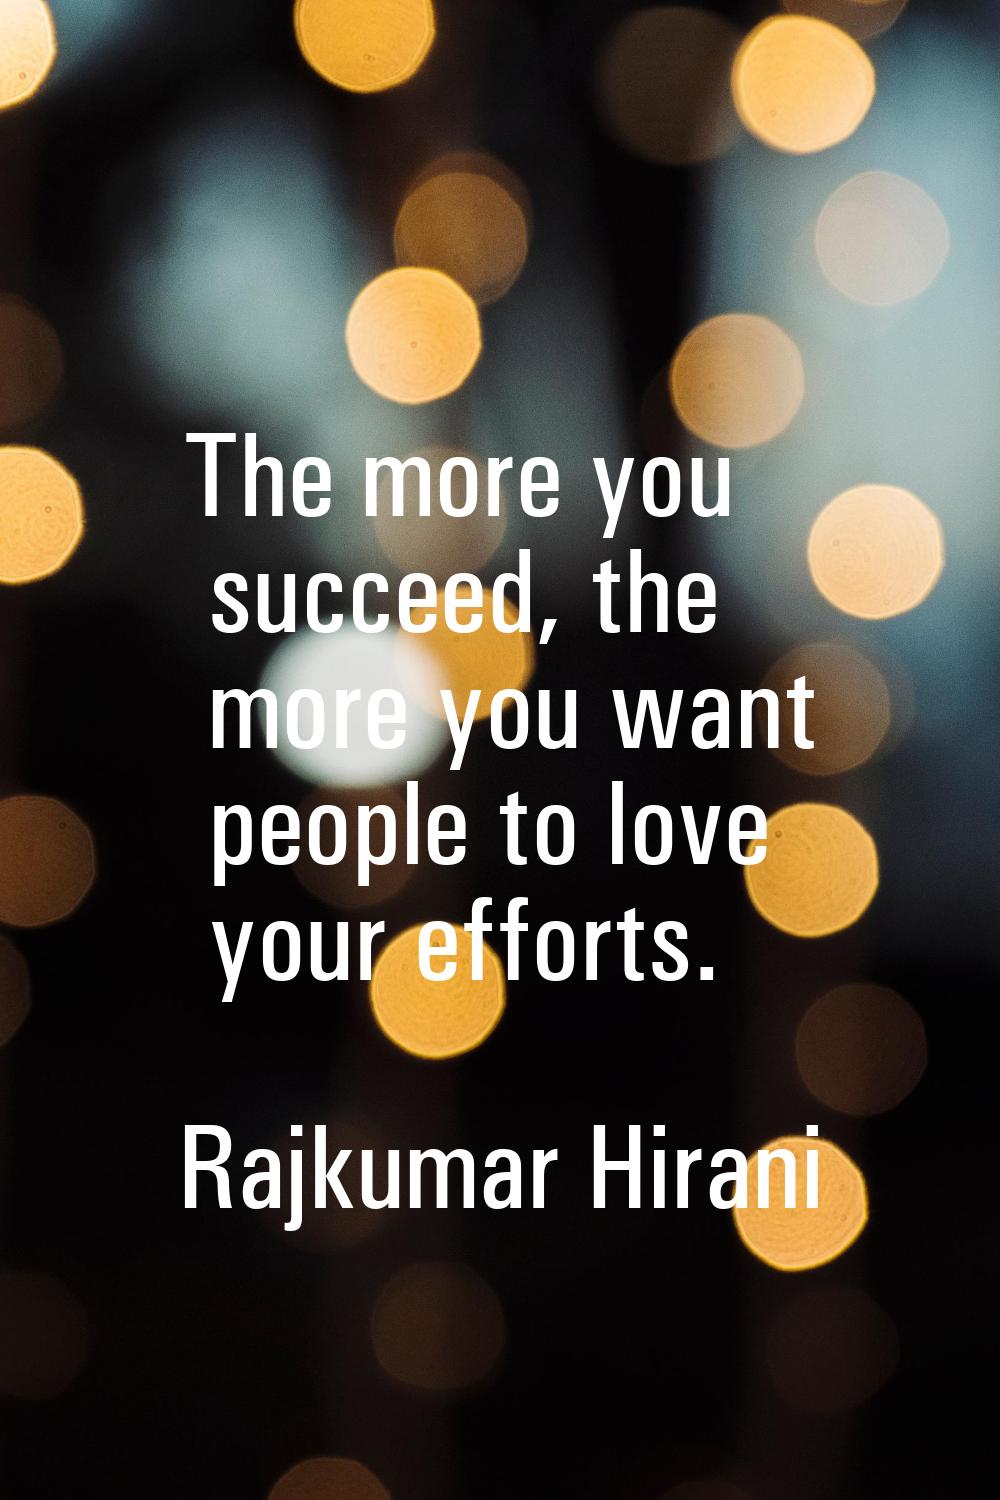 The more you succeed, the more you want people to love your efforts.